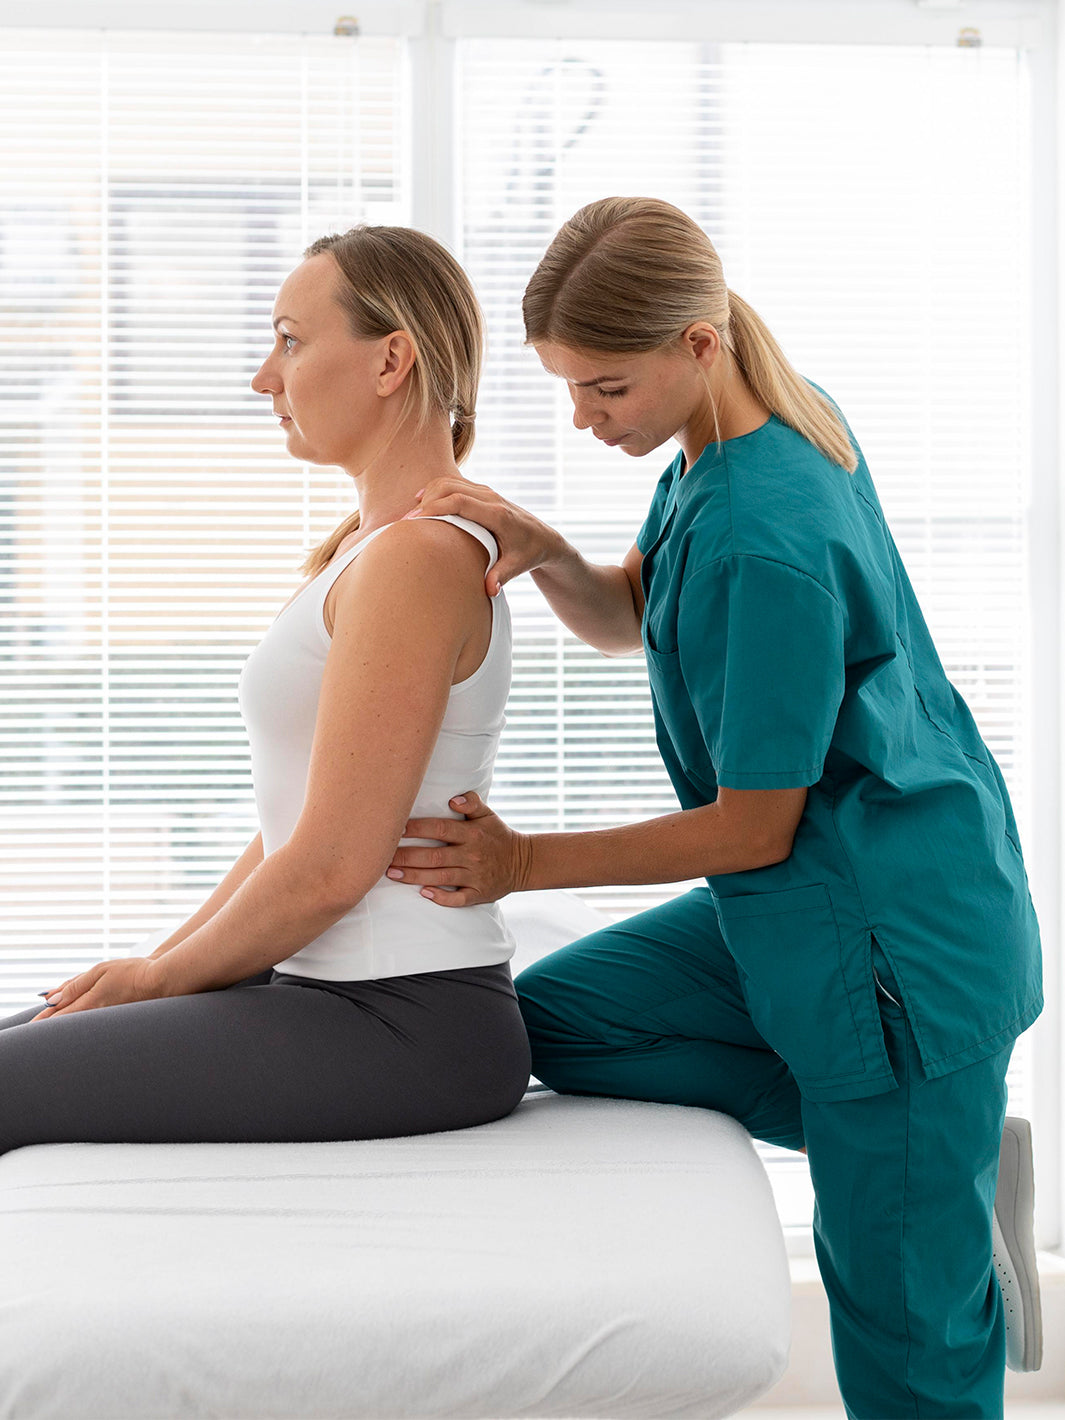 Woman getting her back adjusted by a healthcare professional